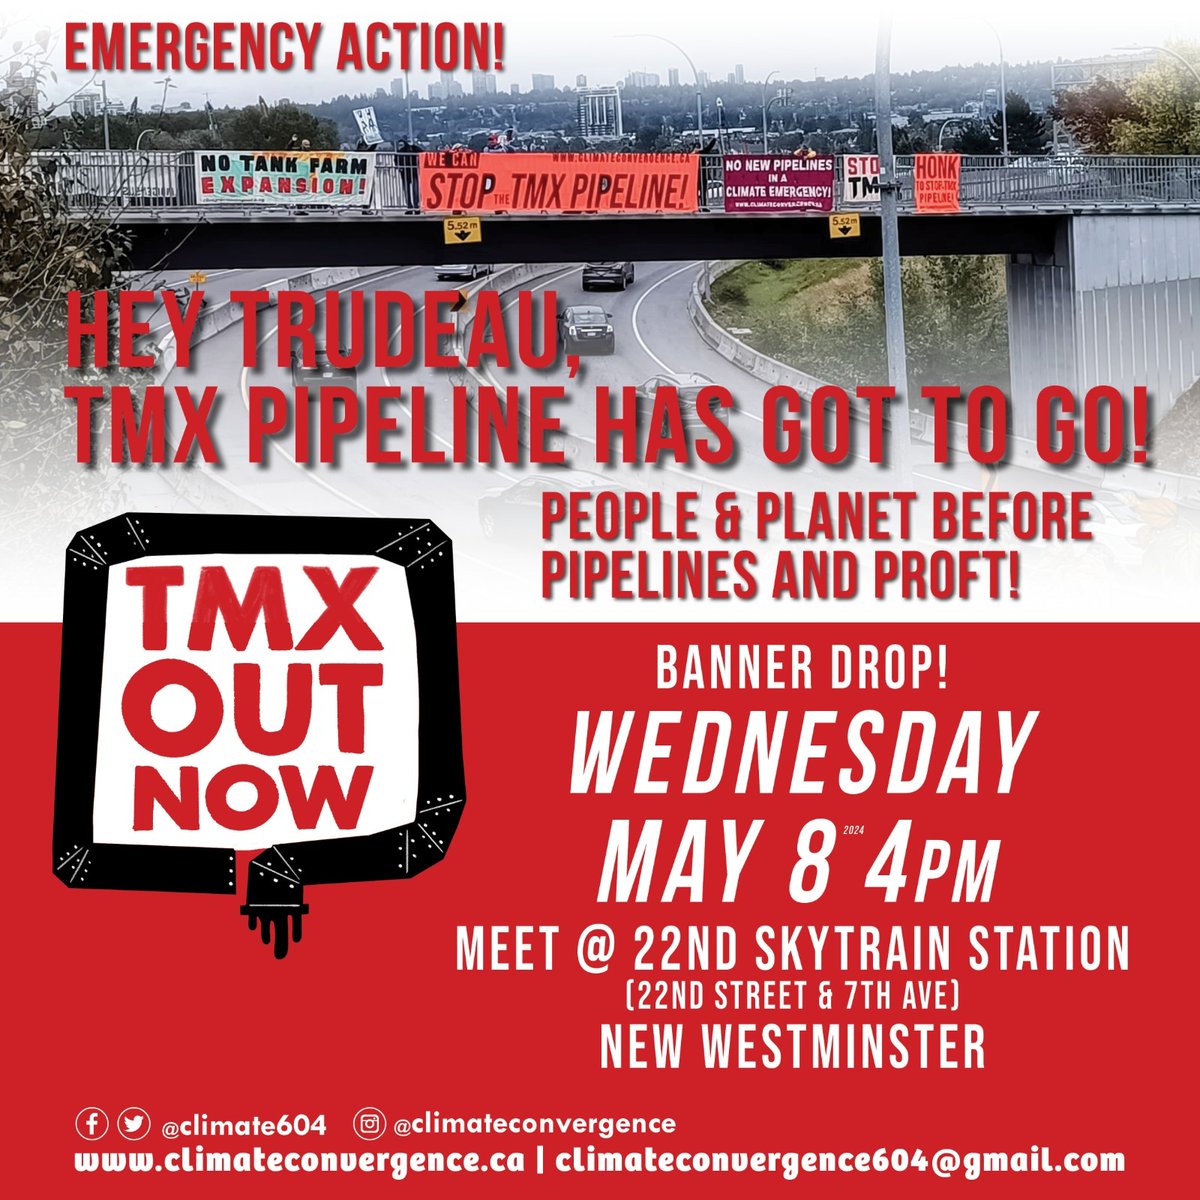 EMERGENCY ACTION #StopTMX! Join the May 8 Banner Drop @ 22nd St #SkyTrain Station in #NewWestminster. #Trudeau has given climate destroying #TMX the  rubber-stamp to operate - Unite to Cancel TMX Now! 
#vanpoli #bcpoli #cdnpoli #Vancouver #climateaction #ClimateJustice #Vancity